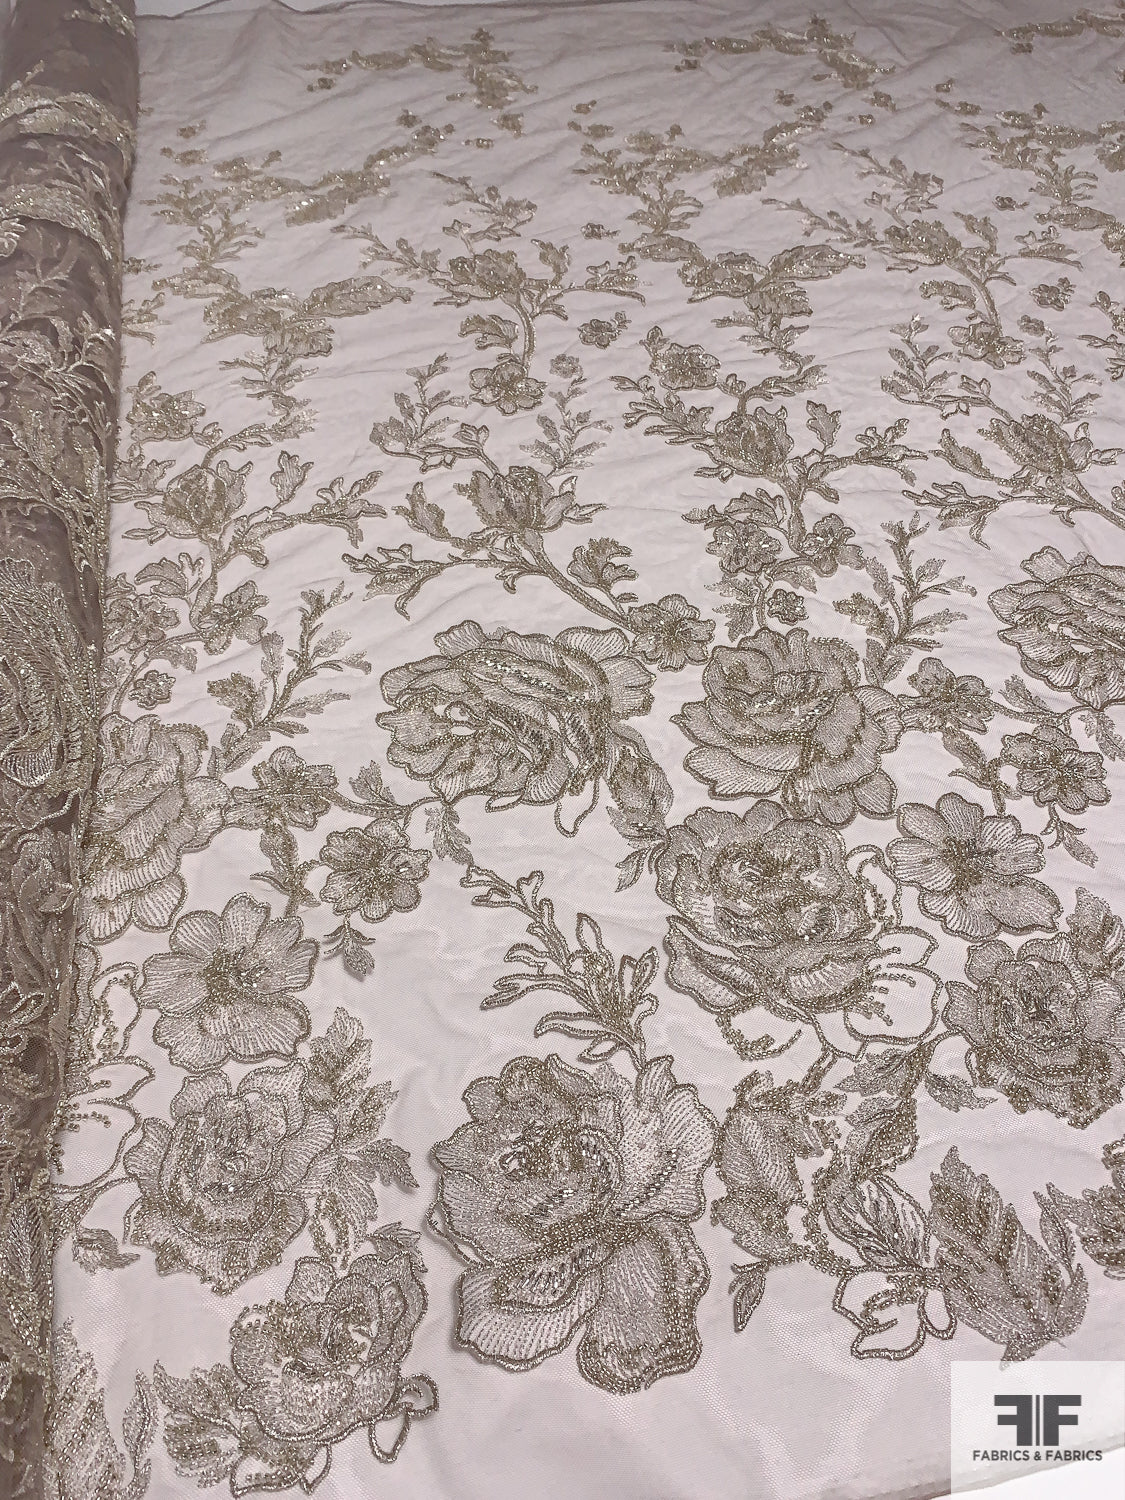 Exquisite Border Pattern Floral Embroidered Tulle with Beading - Silver / Light Grey